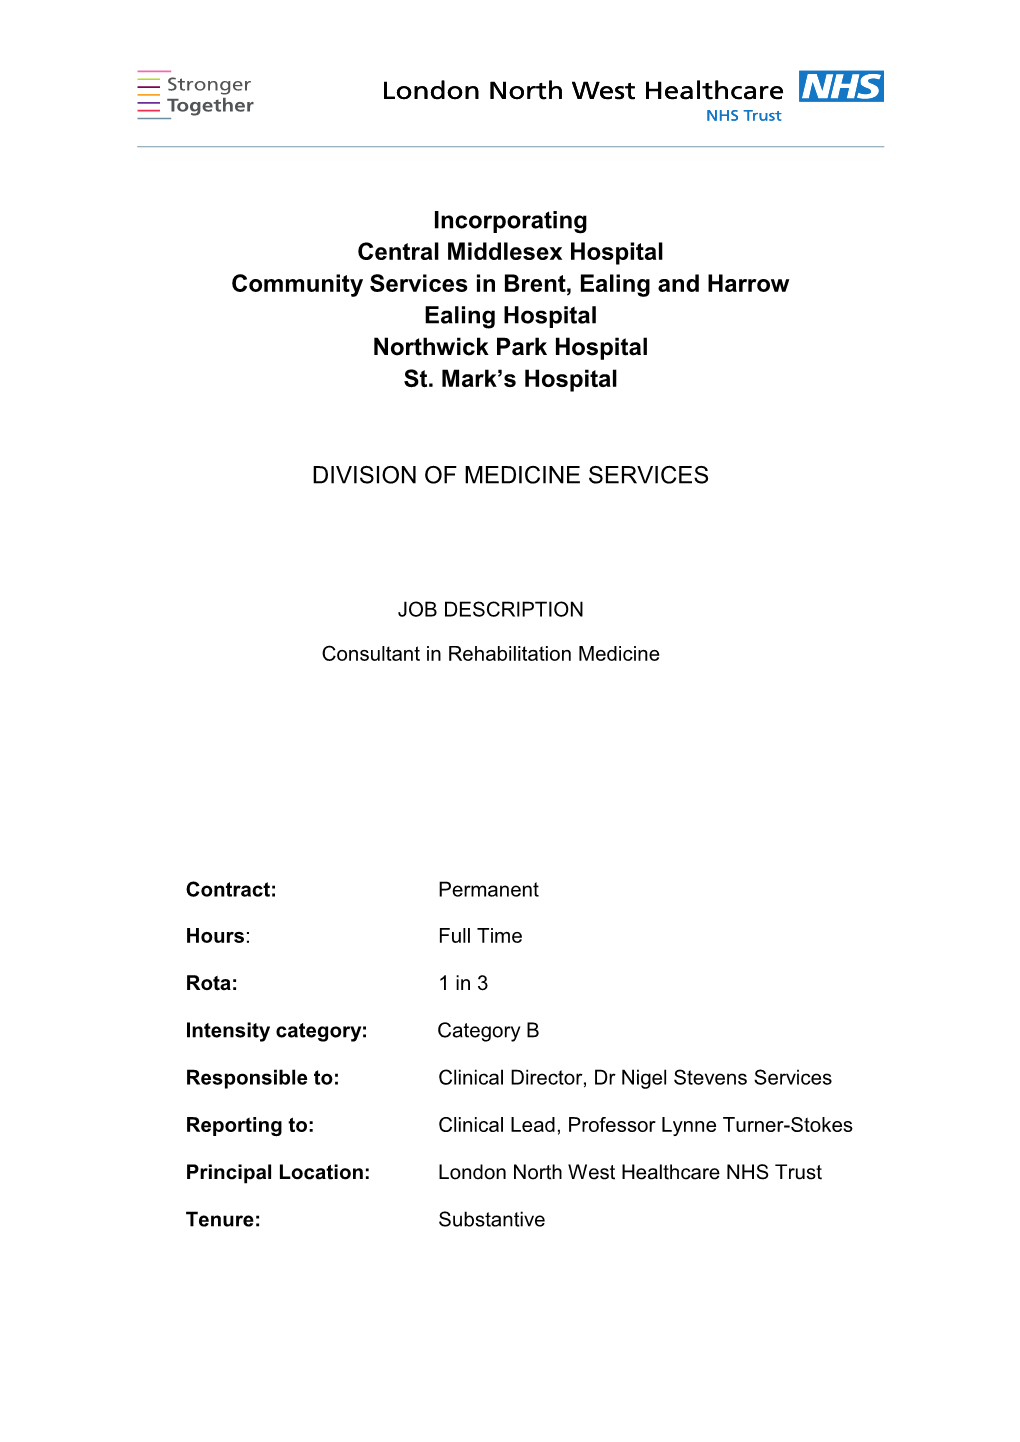 Incorporating Central Middlesex Hospital Community Services in Brent, Ealing and Harrow Ealing Hospital Northwick Park Hospital St